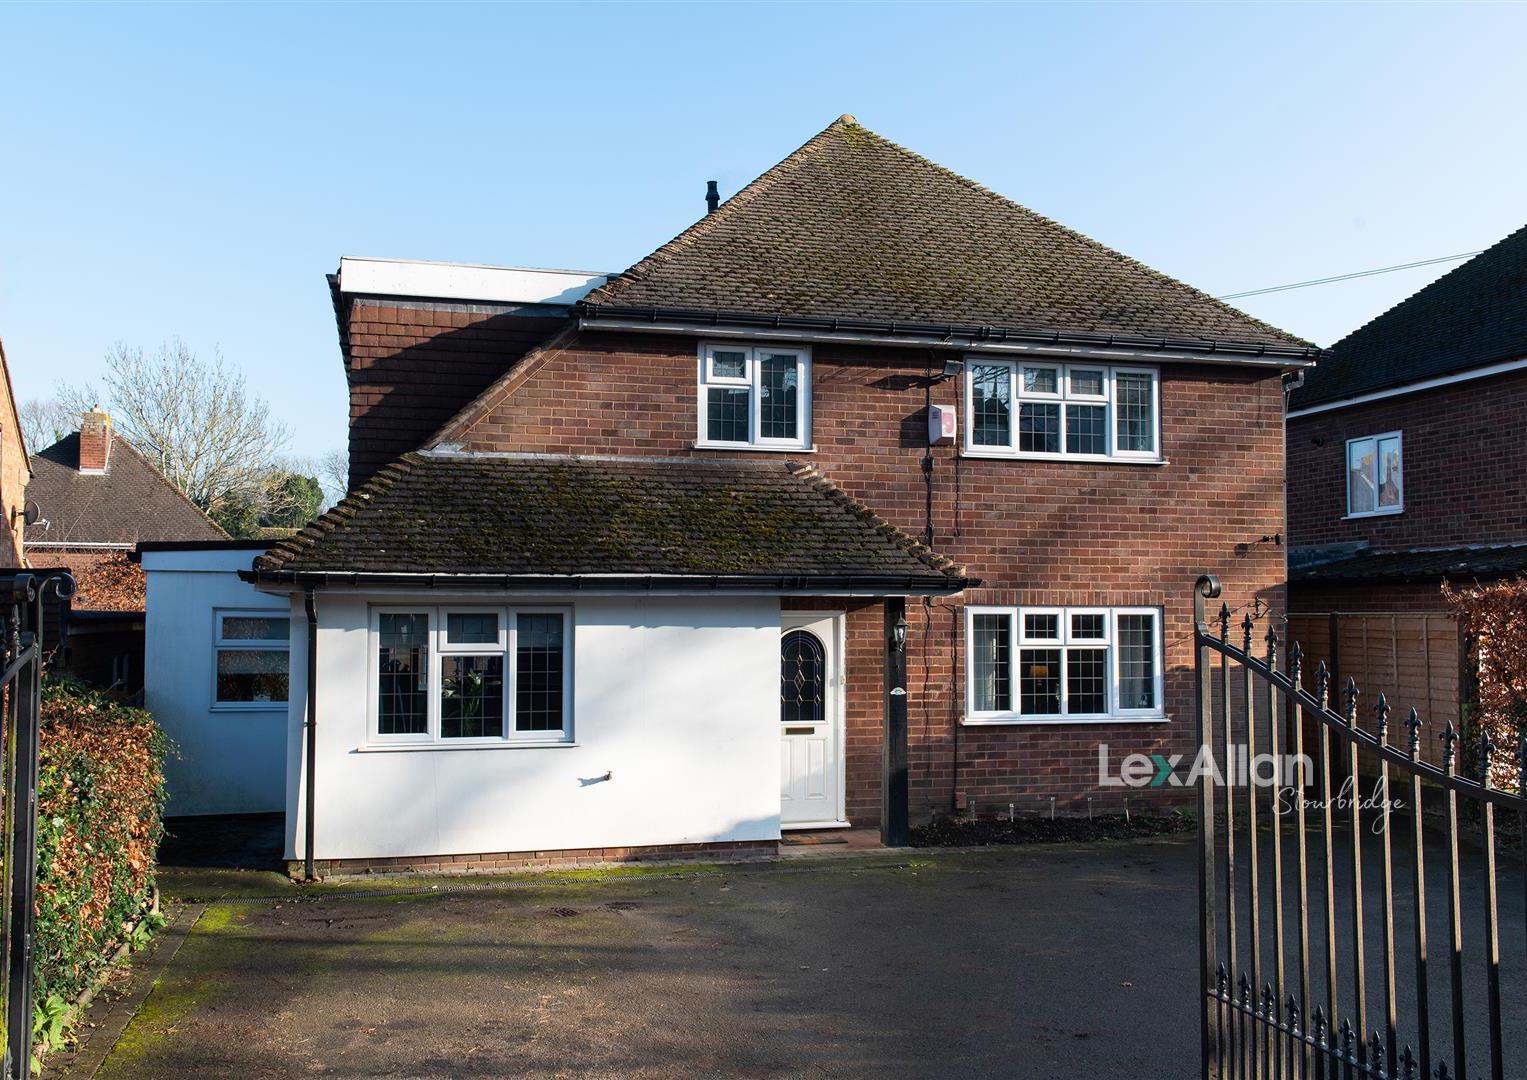 4 bed  for sale in Church Road, Stourbridge, DY8 